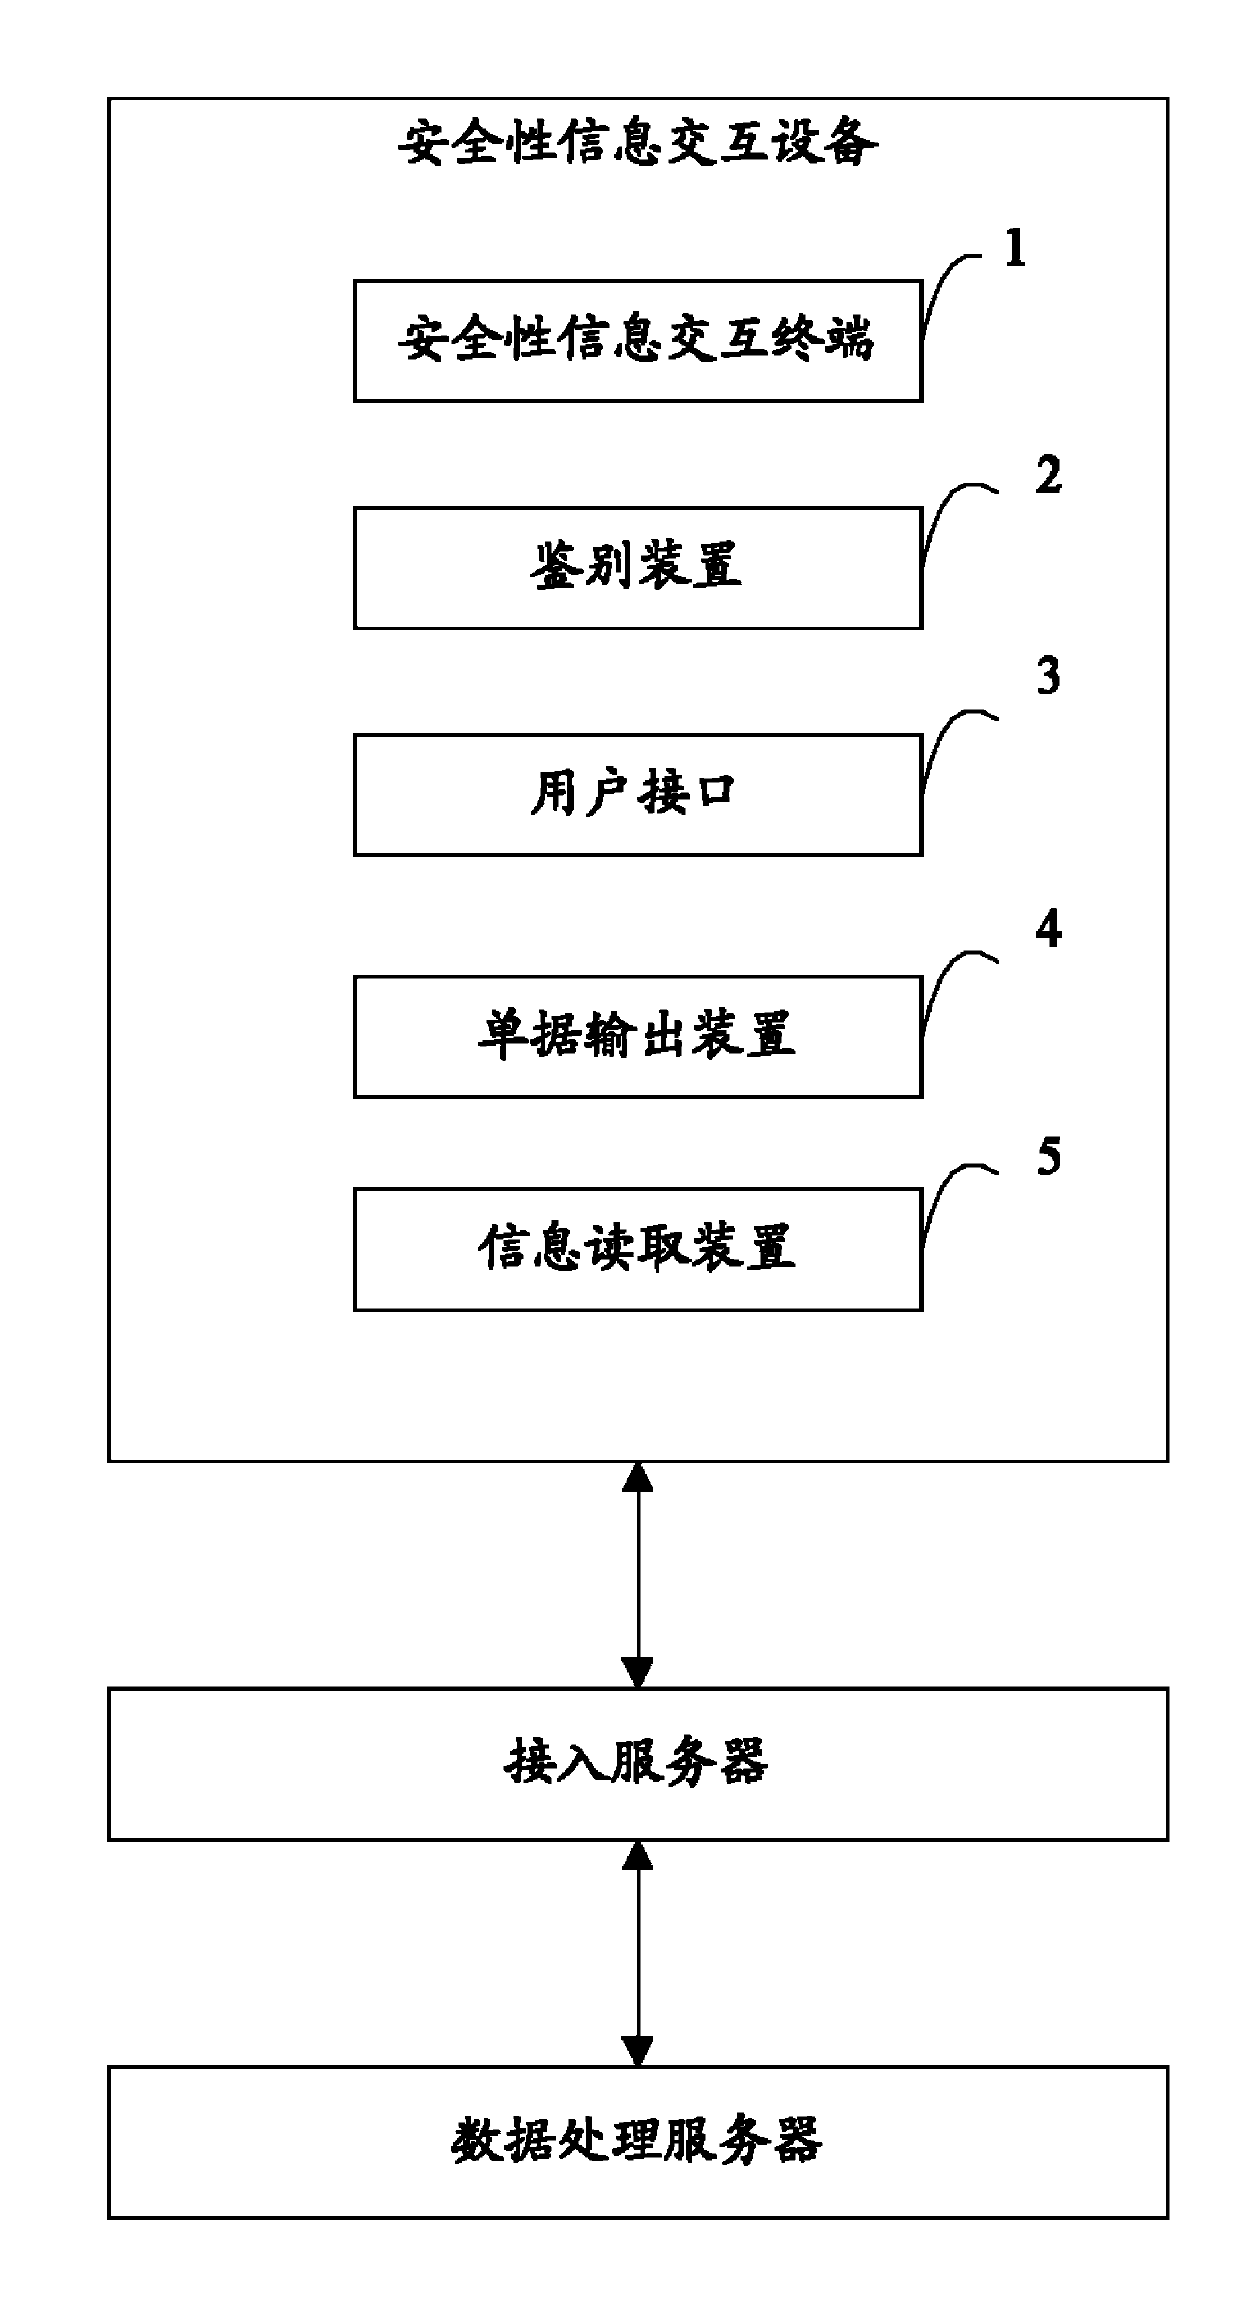 Safety information interaction equipment and safety information interaction method